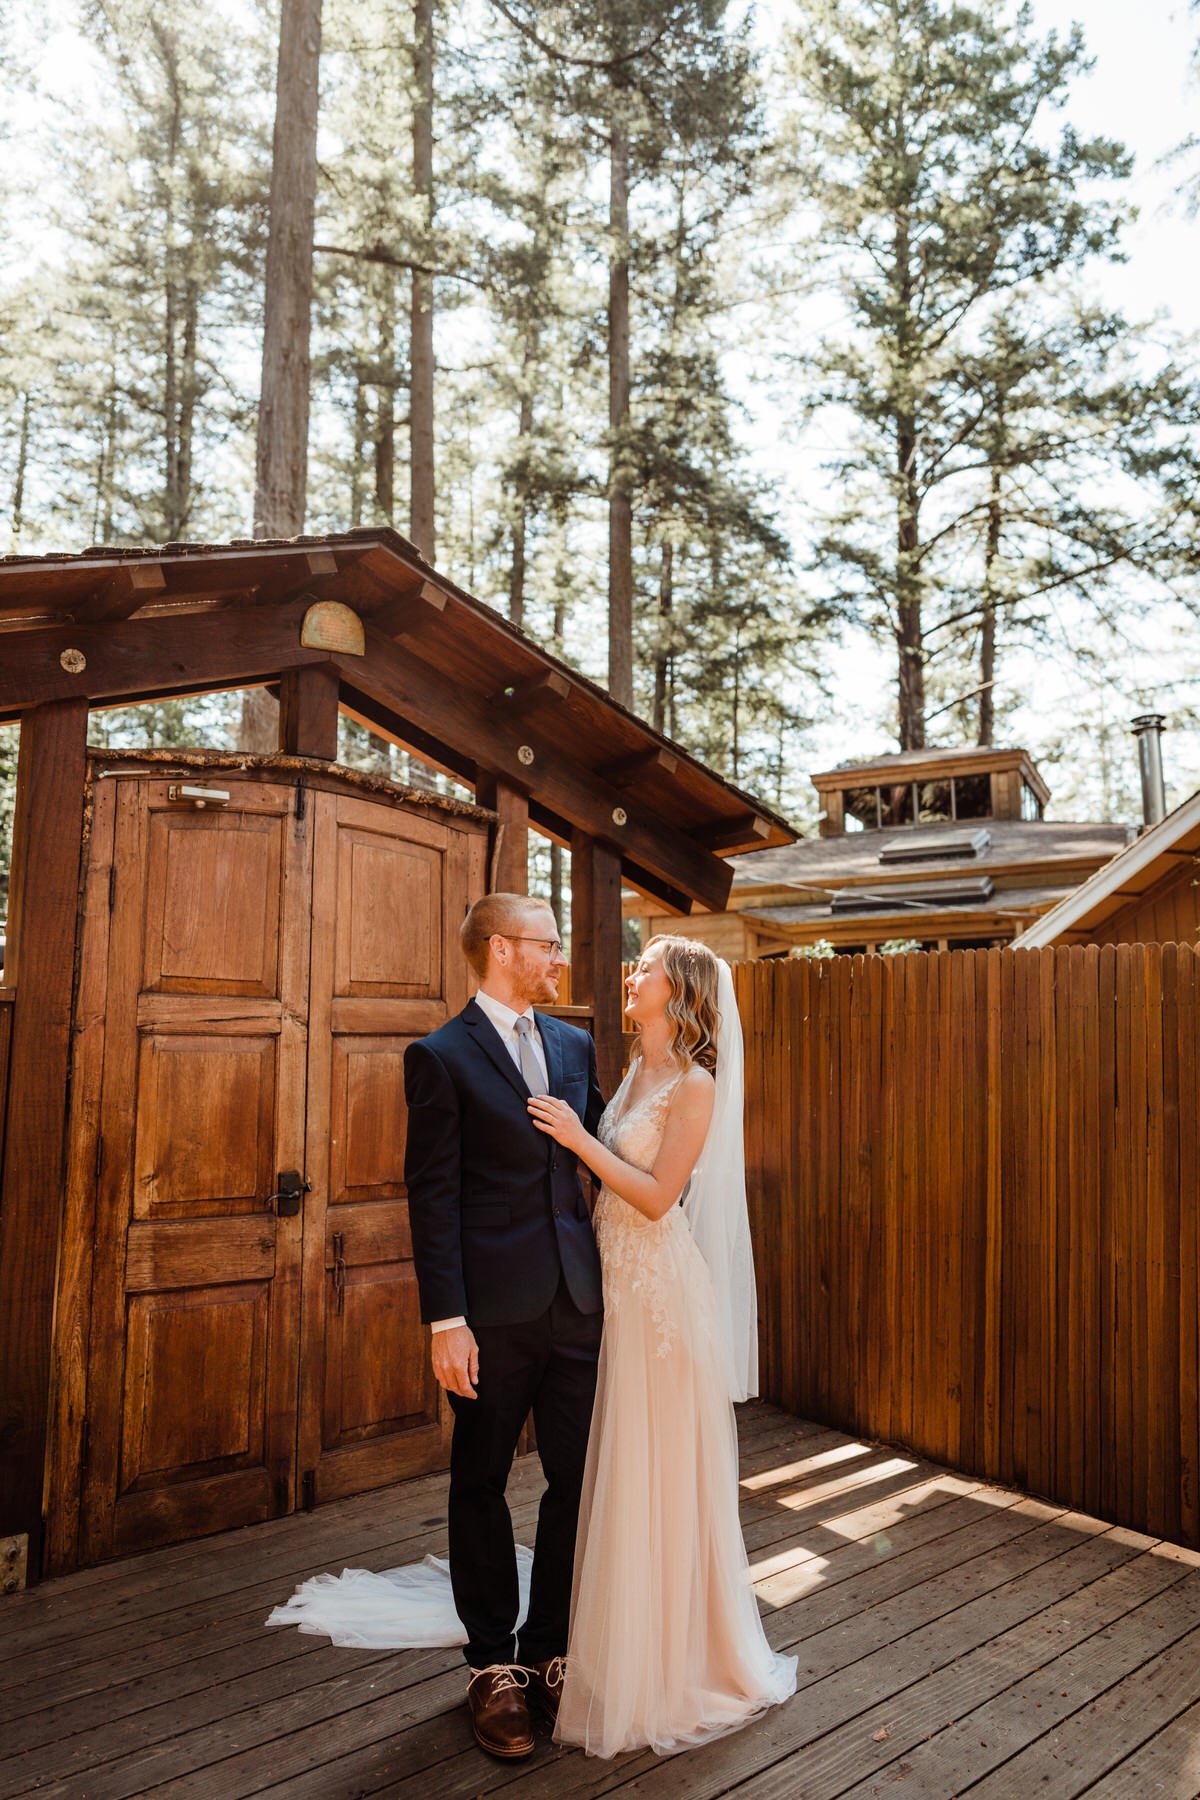 Bride-and-Groom-outside-Redwoods-Airbnb-with-Bali-doors-with-Tall-Trees-in-distance.jpg